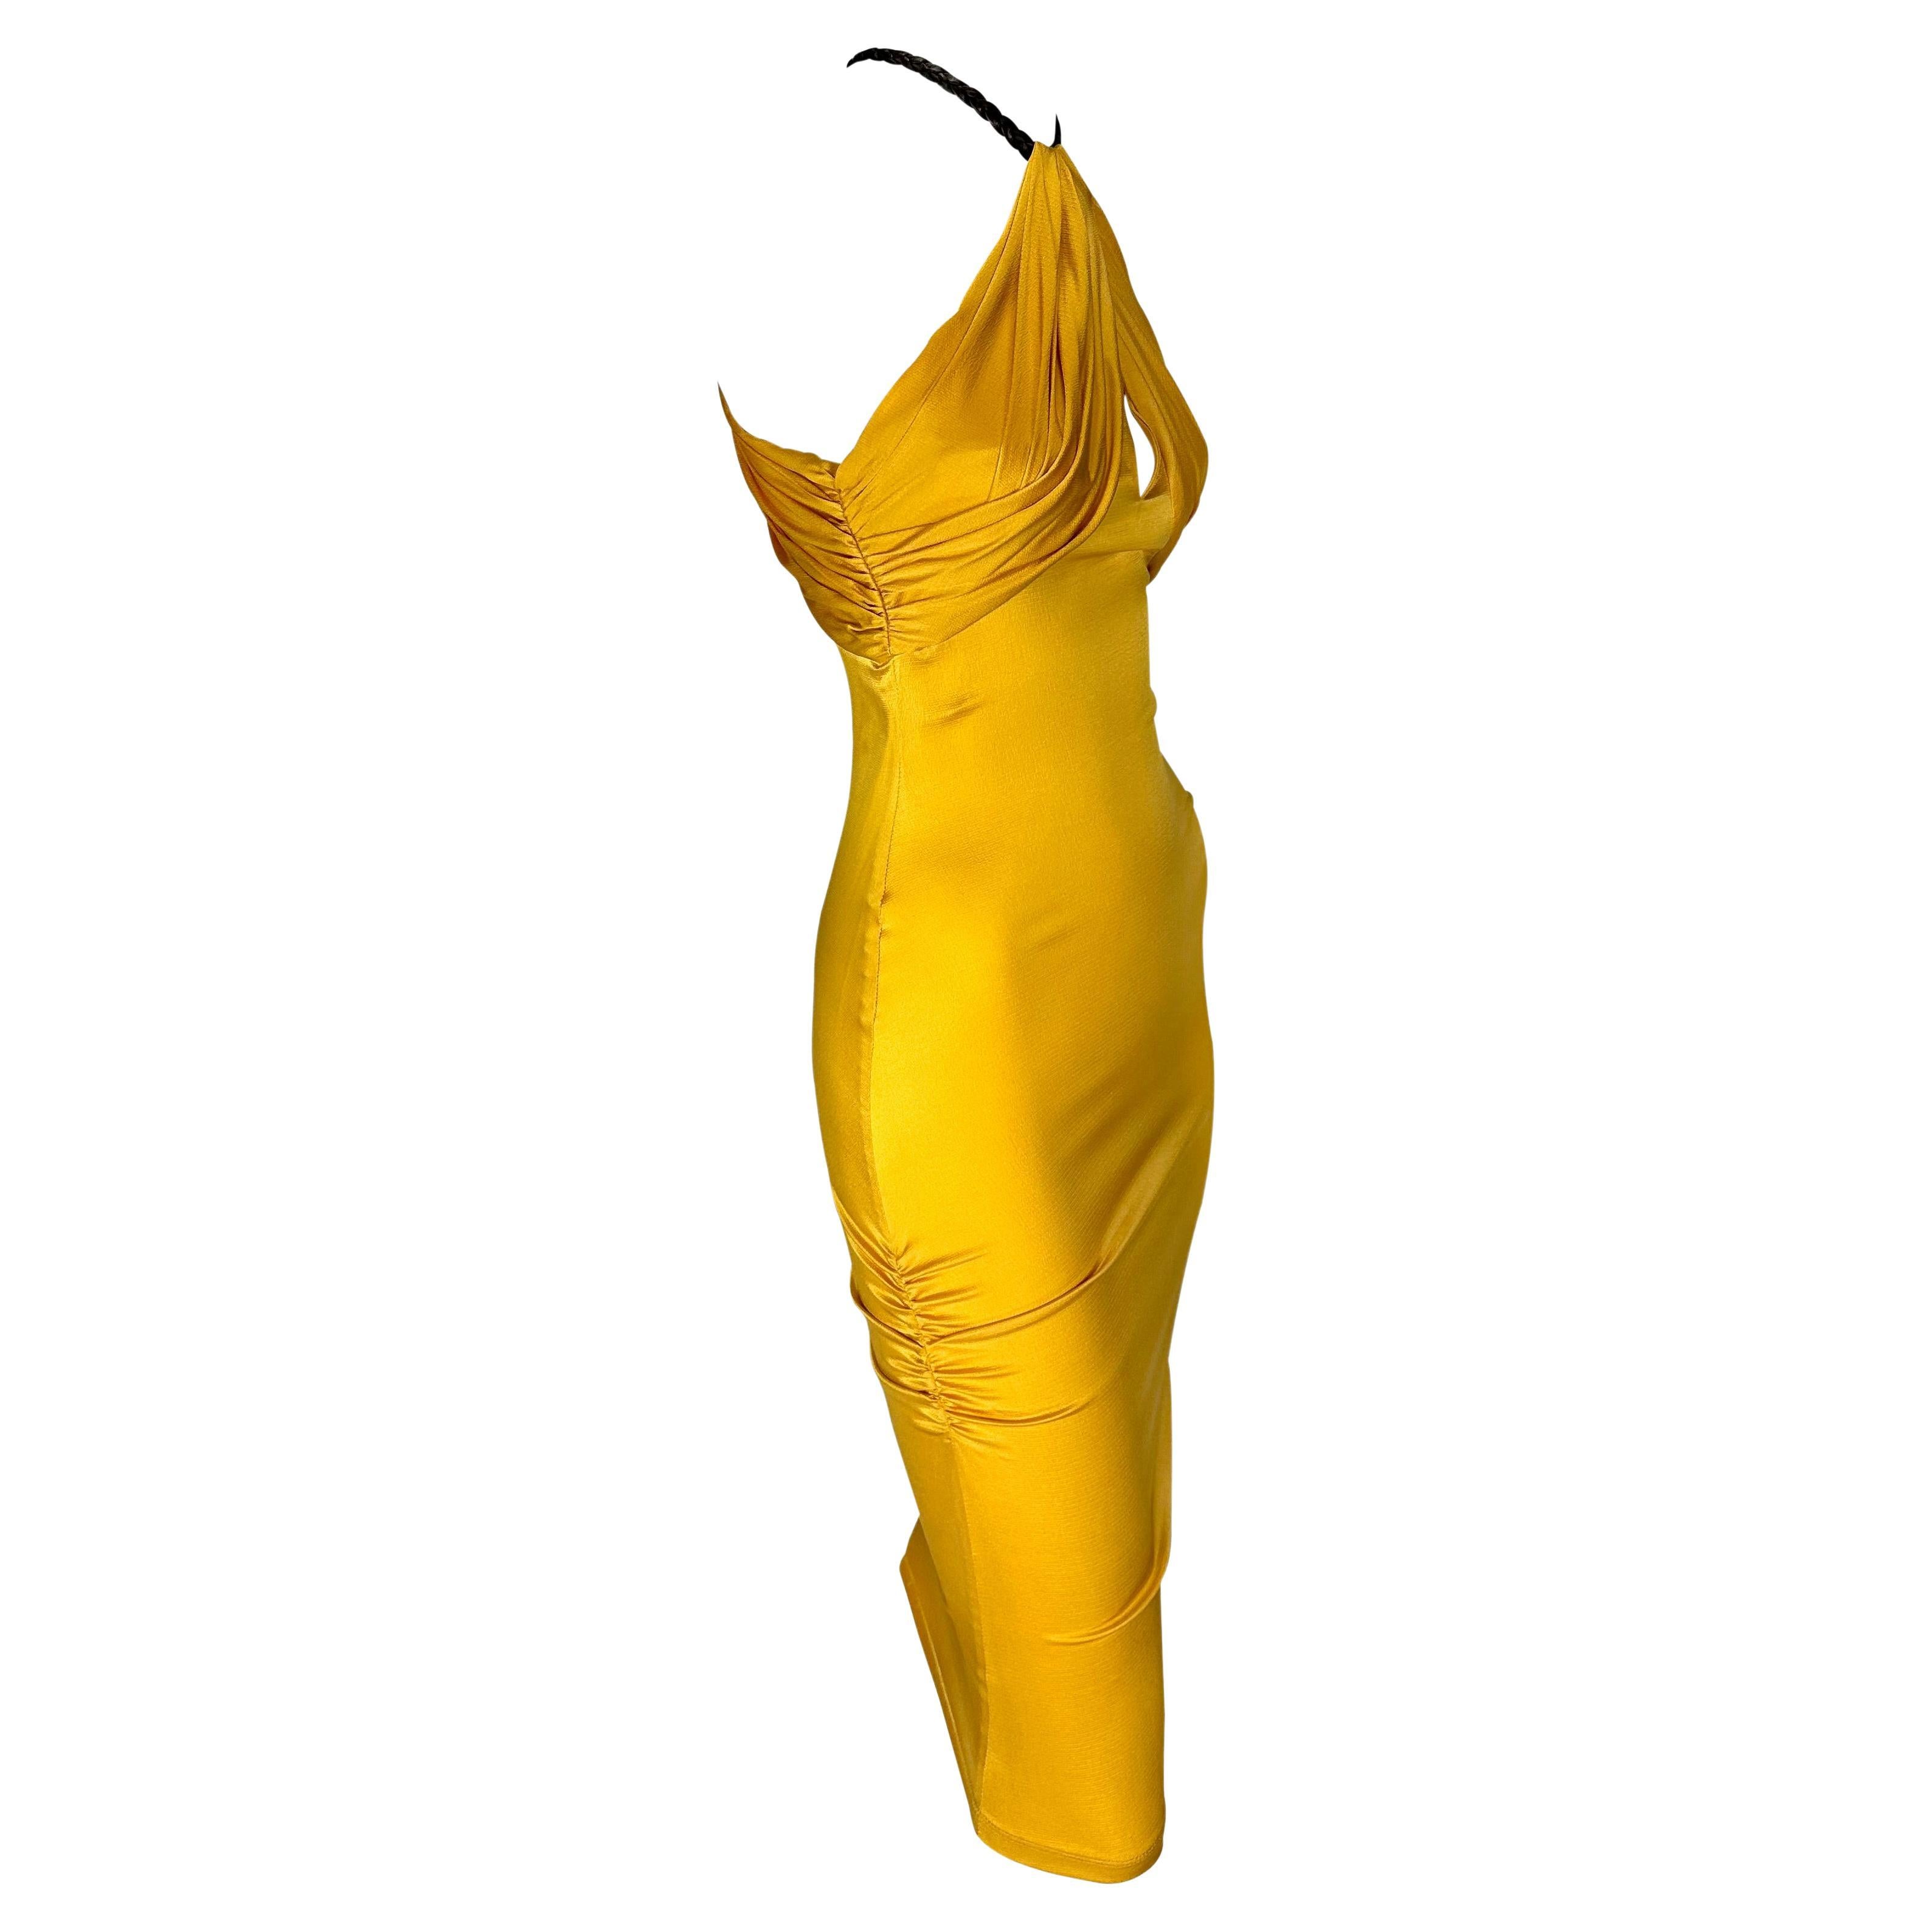 S/S 2005 Gucci Beyoncé Marigold Yellow Ruched Satin Braided Leather Halter Dress For Sale 2